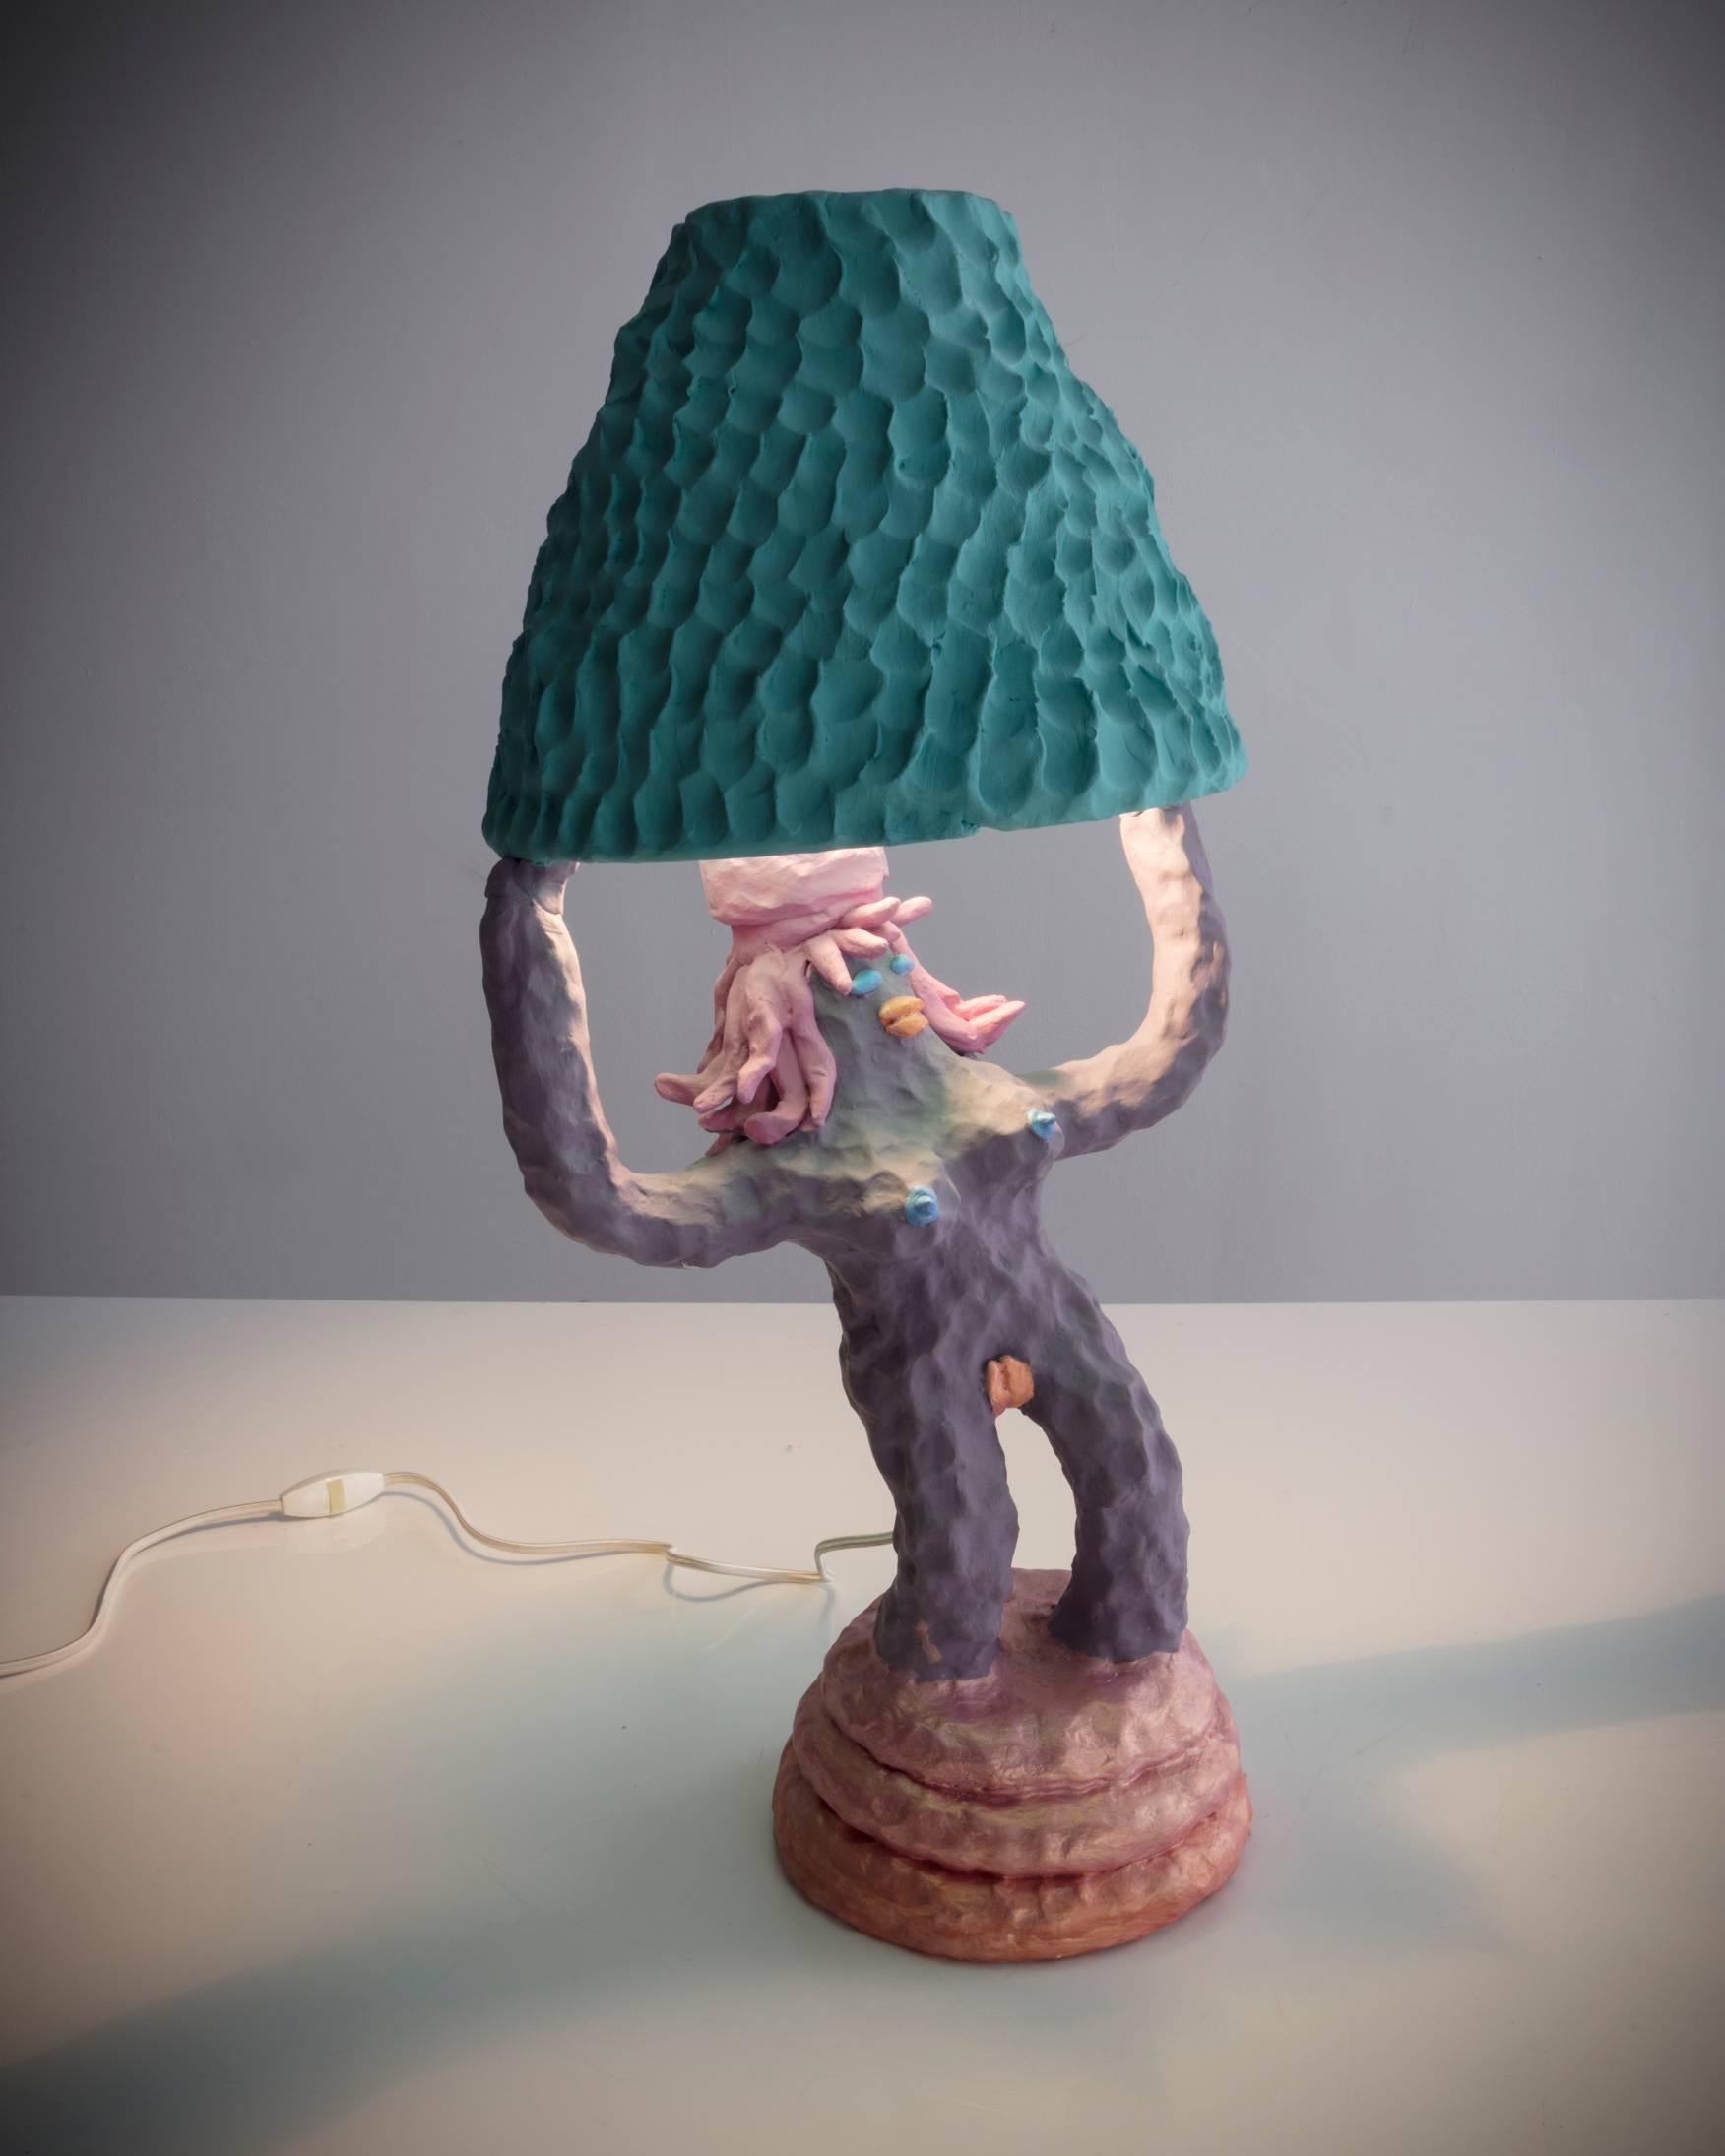 "Girl Lamp" in ceramic with purple single-girl base and aqua textured shade. Designed and made by Katie Stout, USA, 2017.